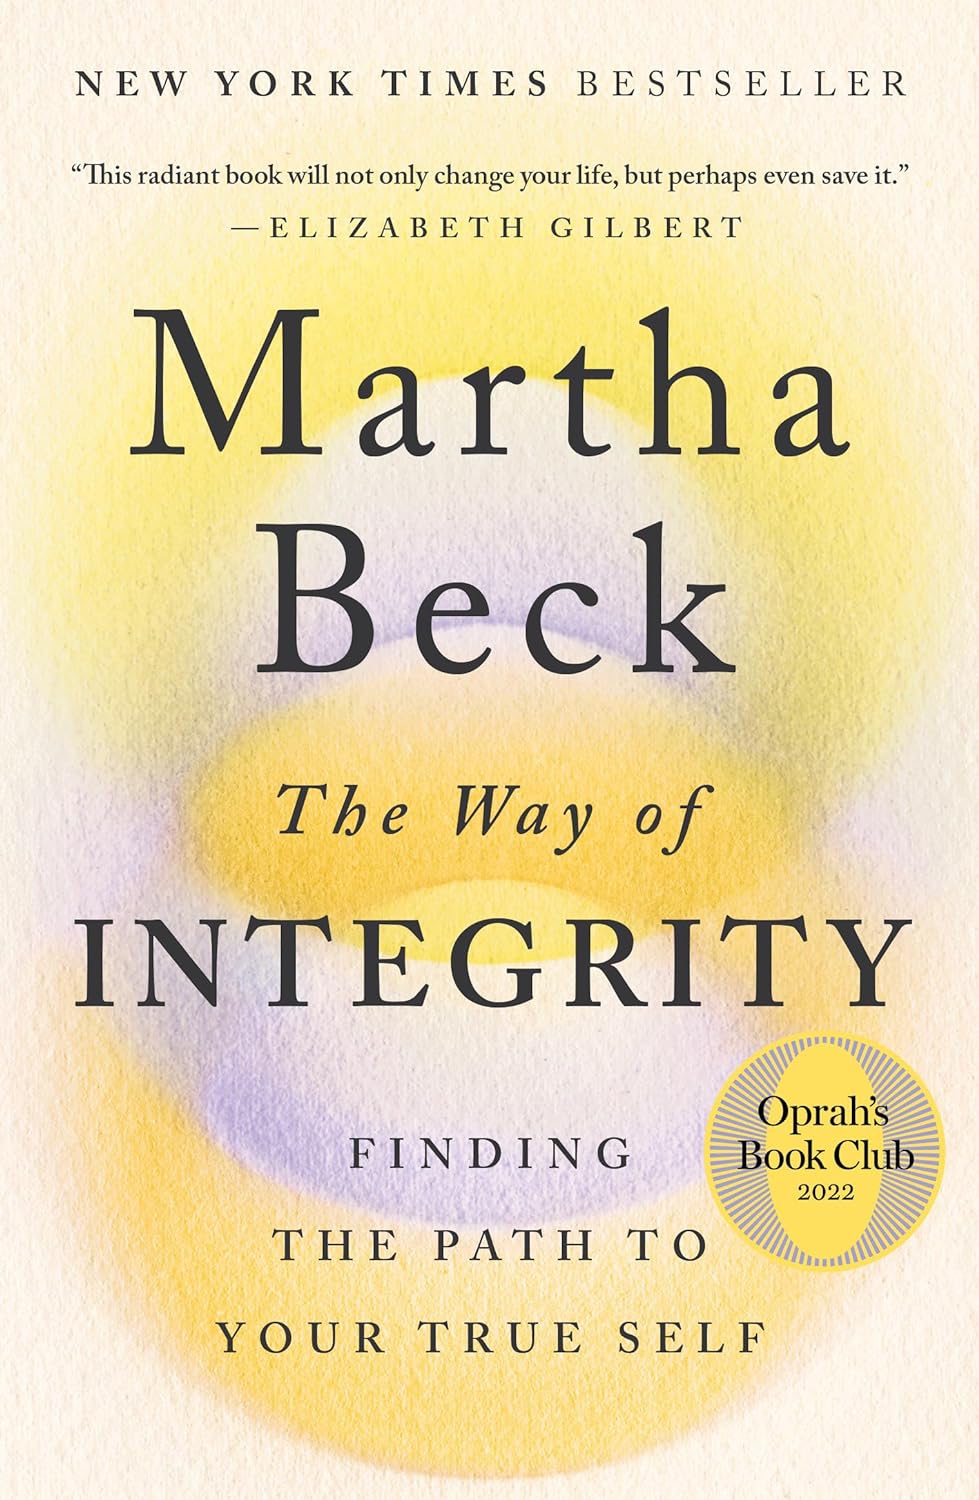 'The Way of Integrity' by Martha Beck